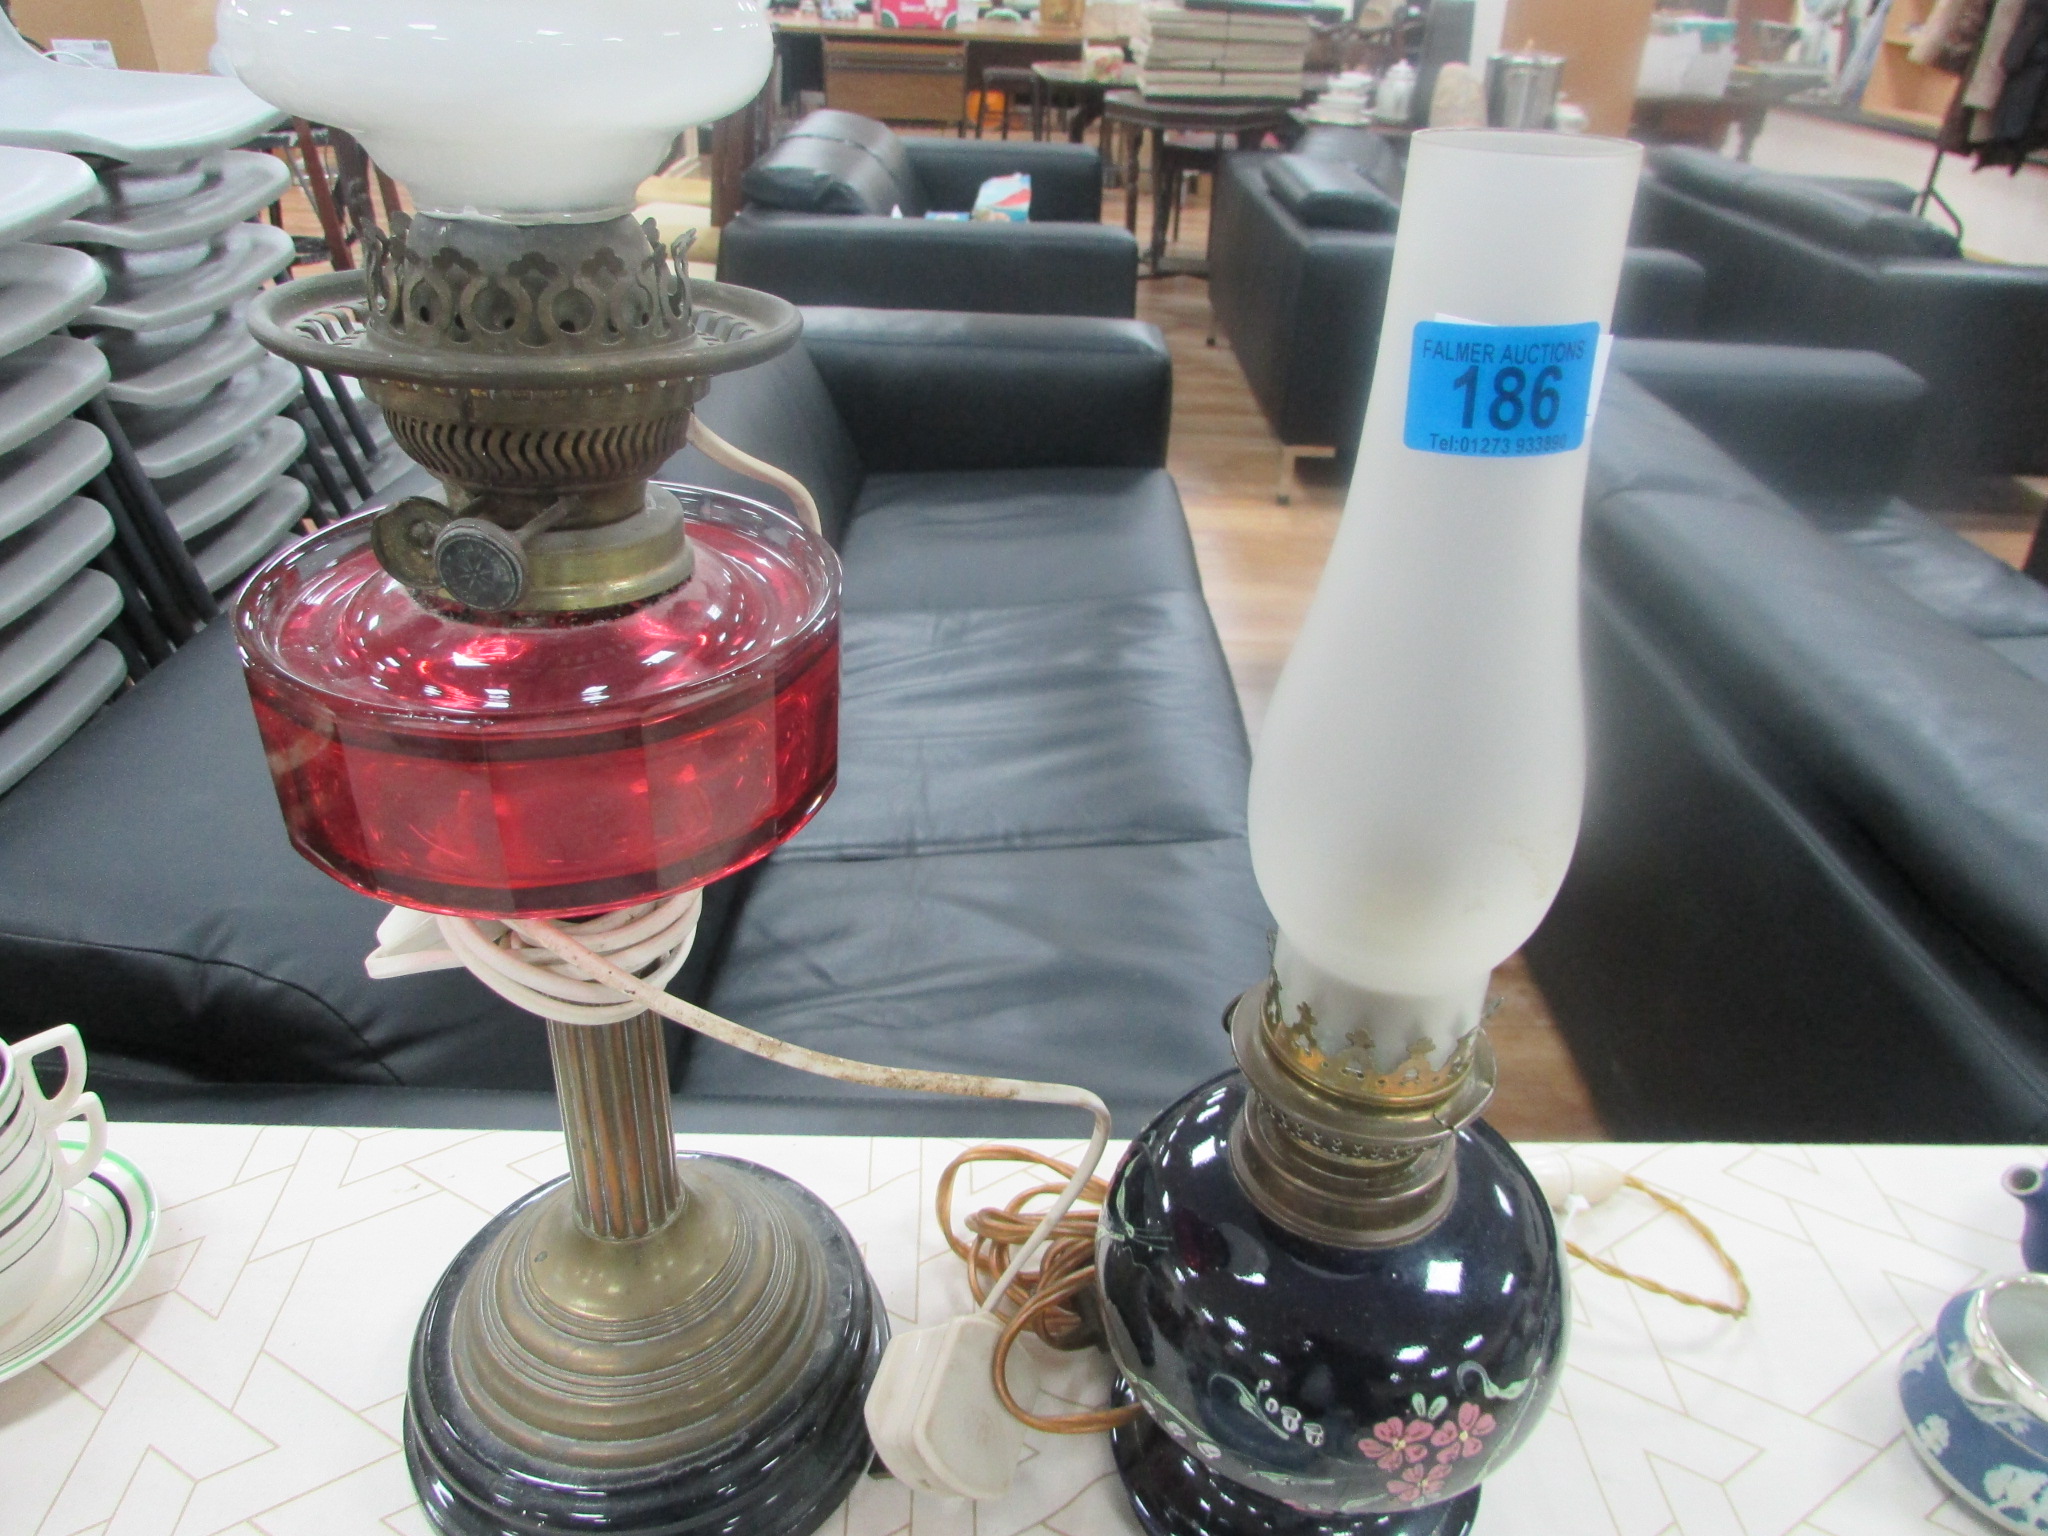 2 Victorian oil lamps (converted to electricity)